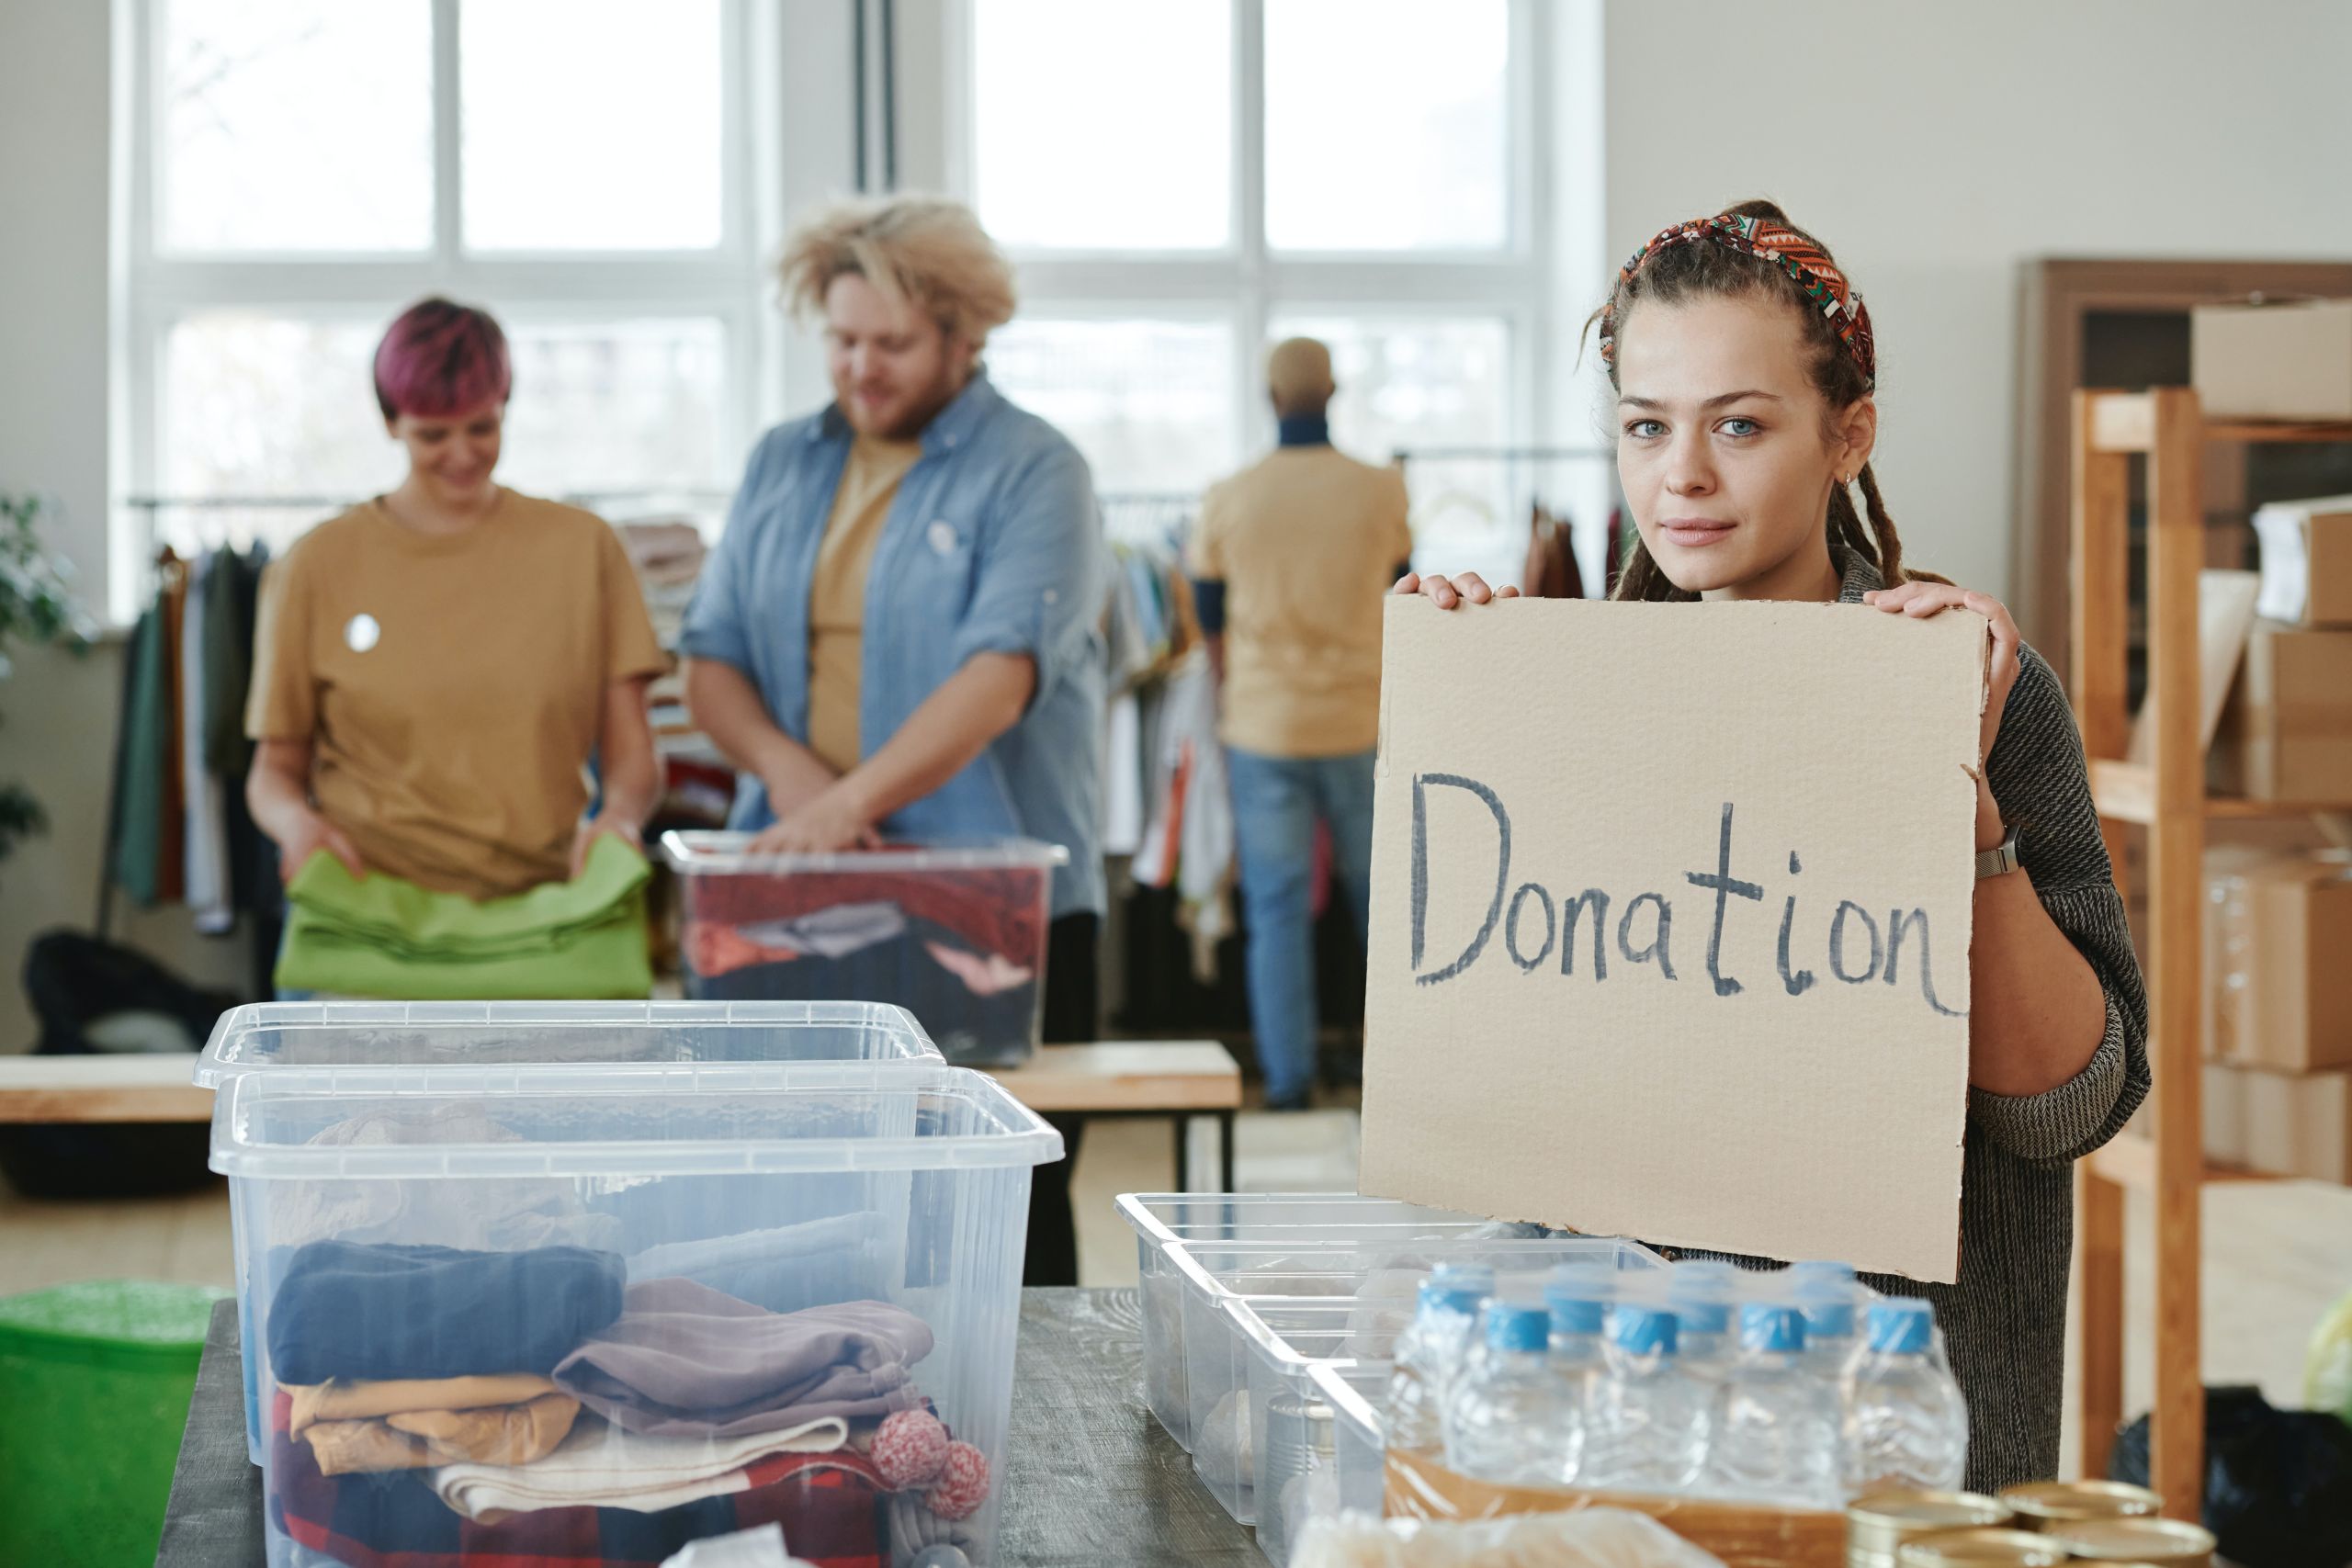 People packing goods into boxes at donation center. Photo by Julia M Cameron from Pexels.